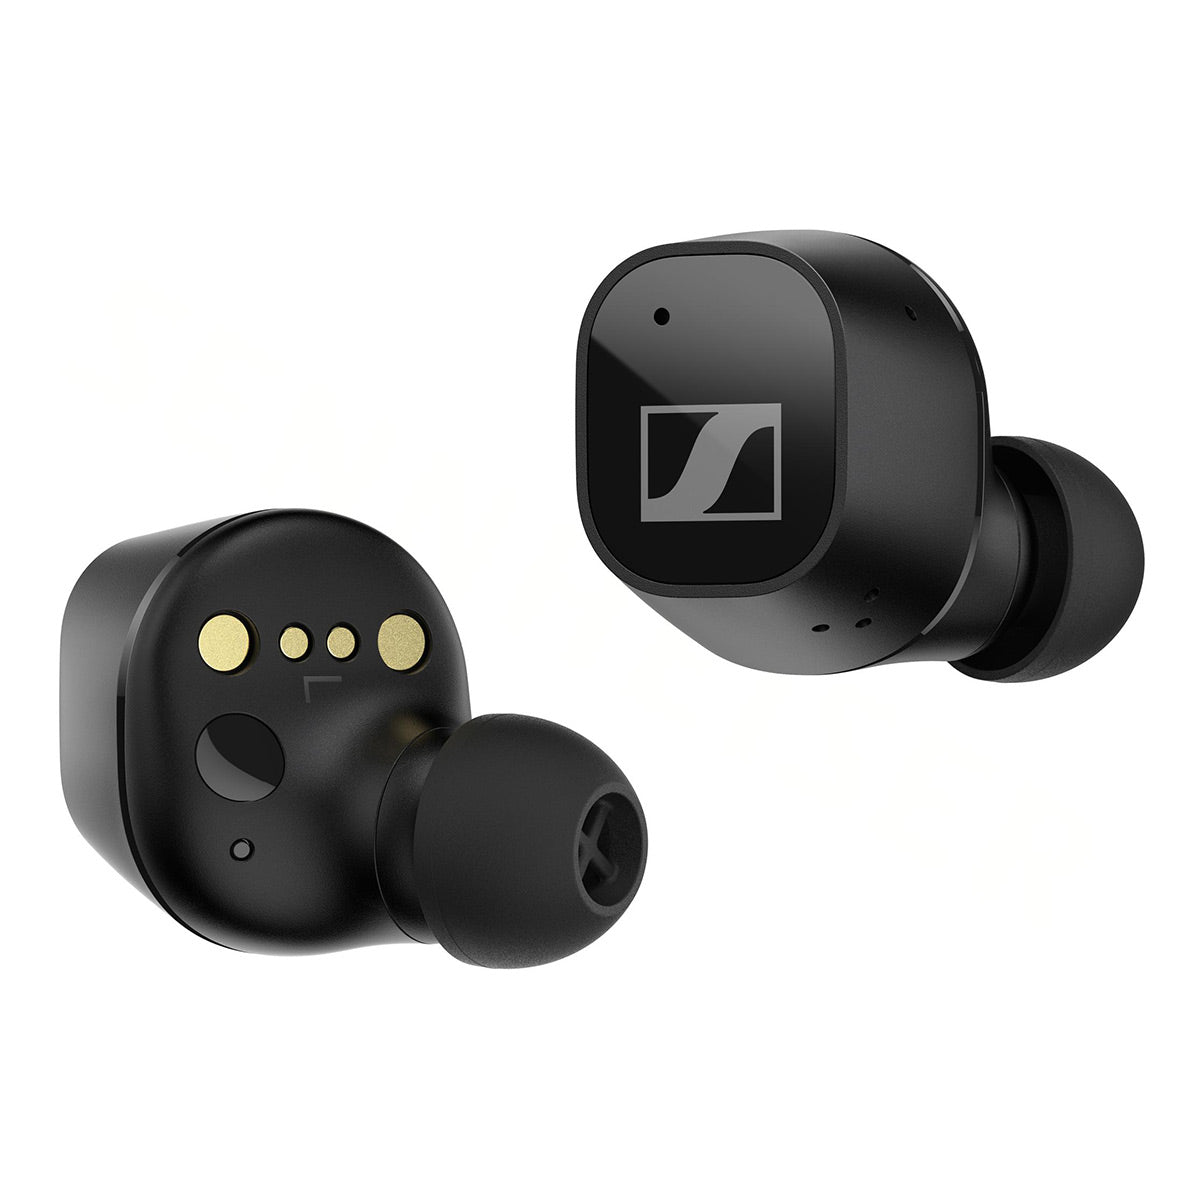 Sennheiser CX Plus True Wireless Earbuds with Active Noise Cancellation (Black)